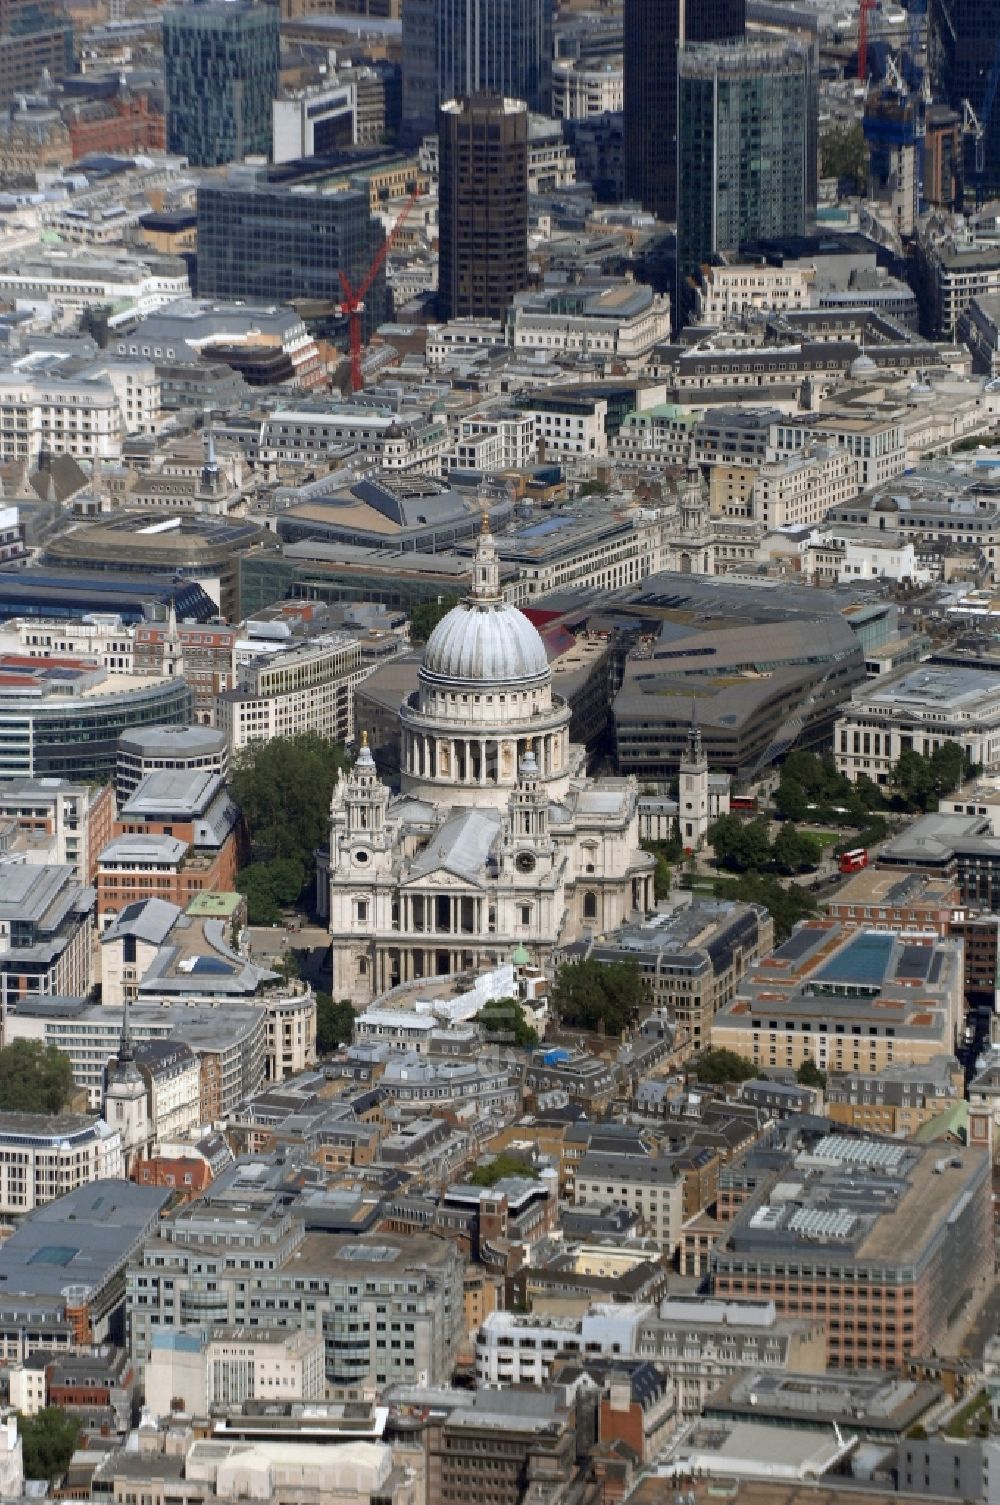 Aerial image London - View of the St Paul's Cathedral in the city borough of City of London. The world-famous church building is the headquarters of the London diocese of the Anglican Church. The St. Paul's Cathedral is one of the largest cathedrals in the world, it is also regarded as the most famous church in the British capital